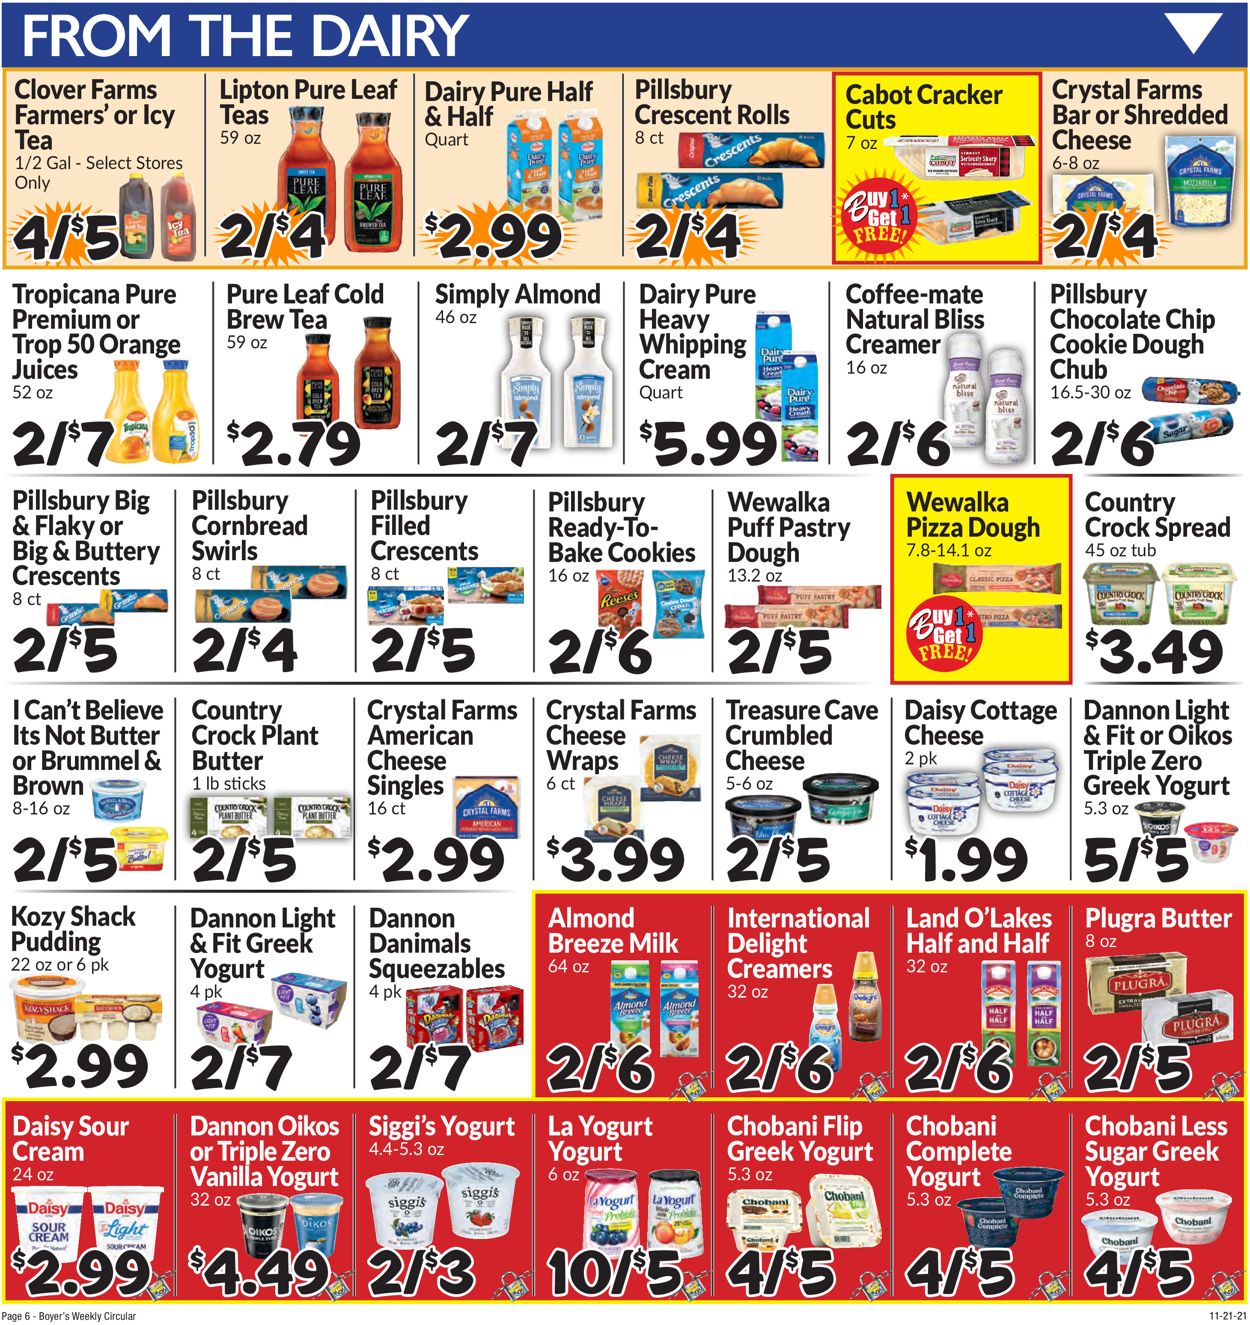 Boyer's Food Markets THANKSGIVING 2021 Weekly Ad Circular - valid 11/21-11/27/2021 (Page 9)